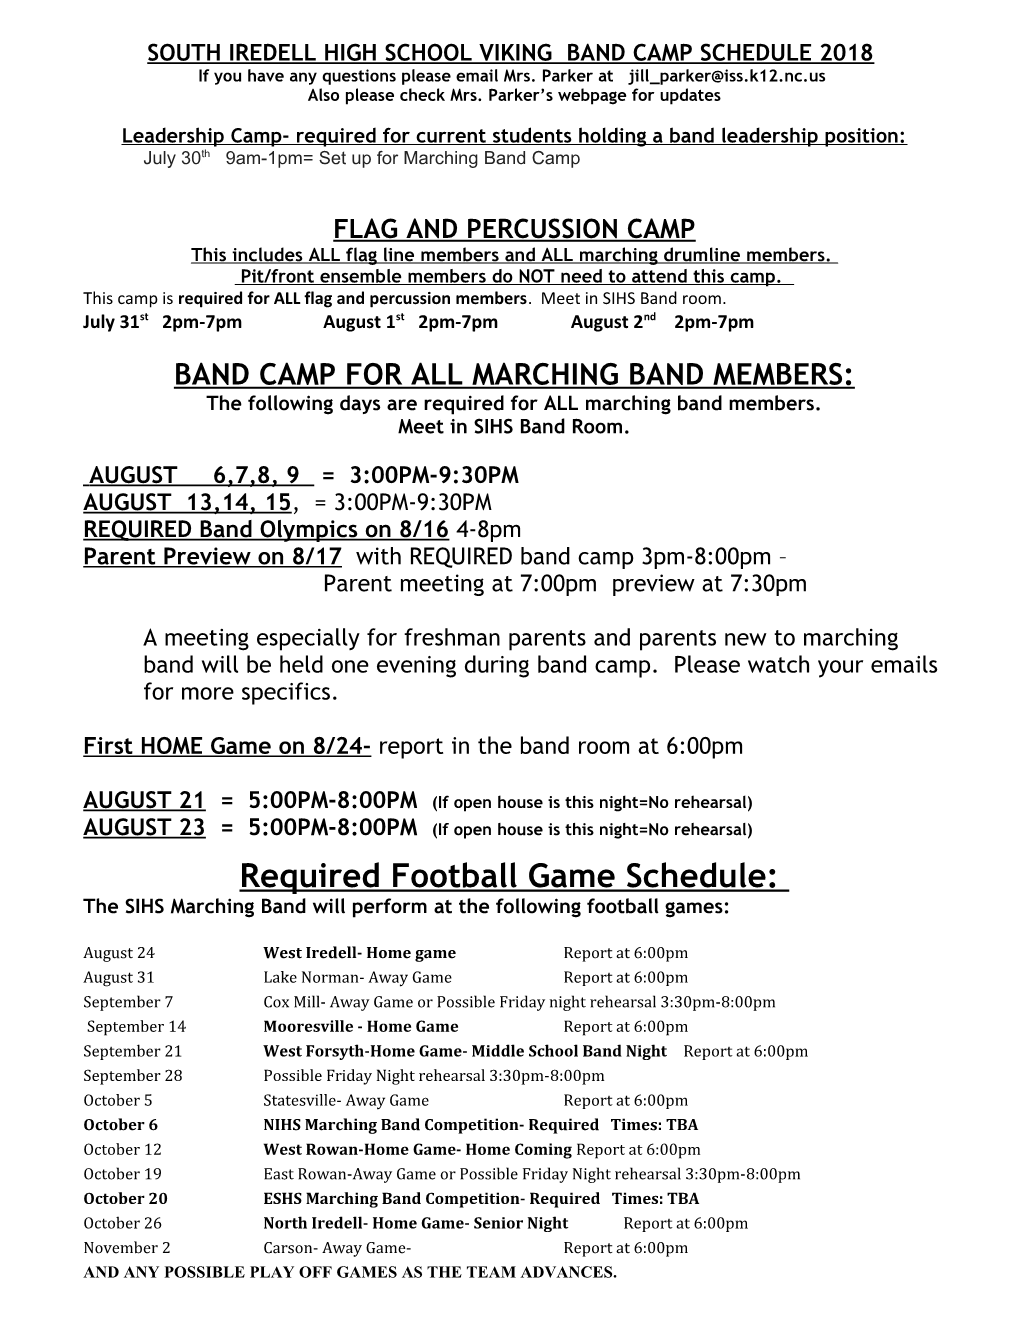 South Iredell High School Viking Marching Band Camp Schedule 8/13/07-8/15/07 , 8Am-5Pm Sihs